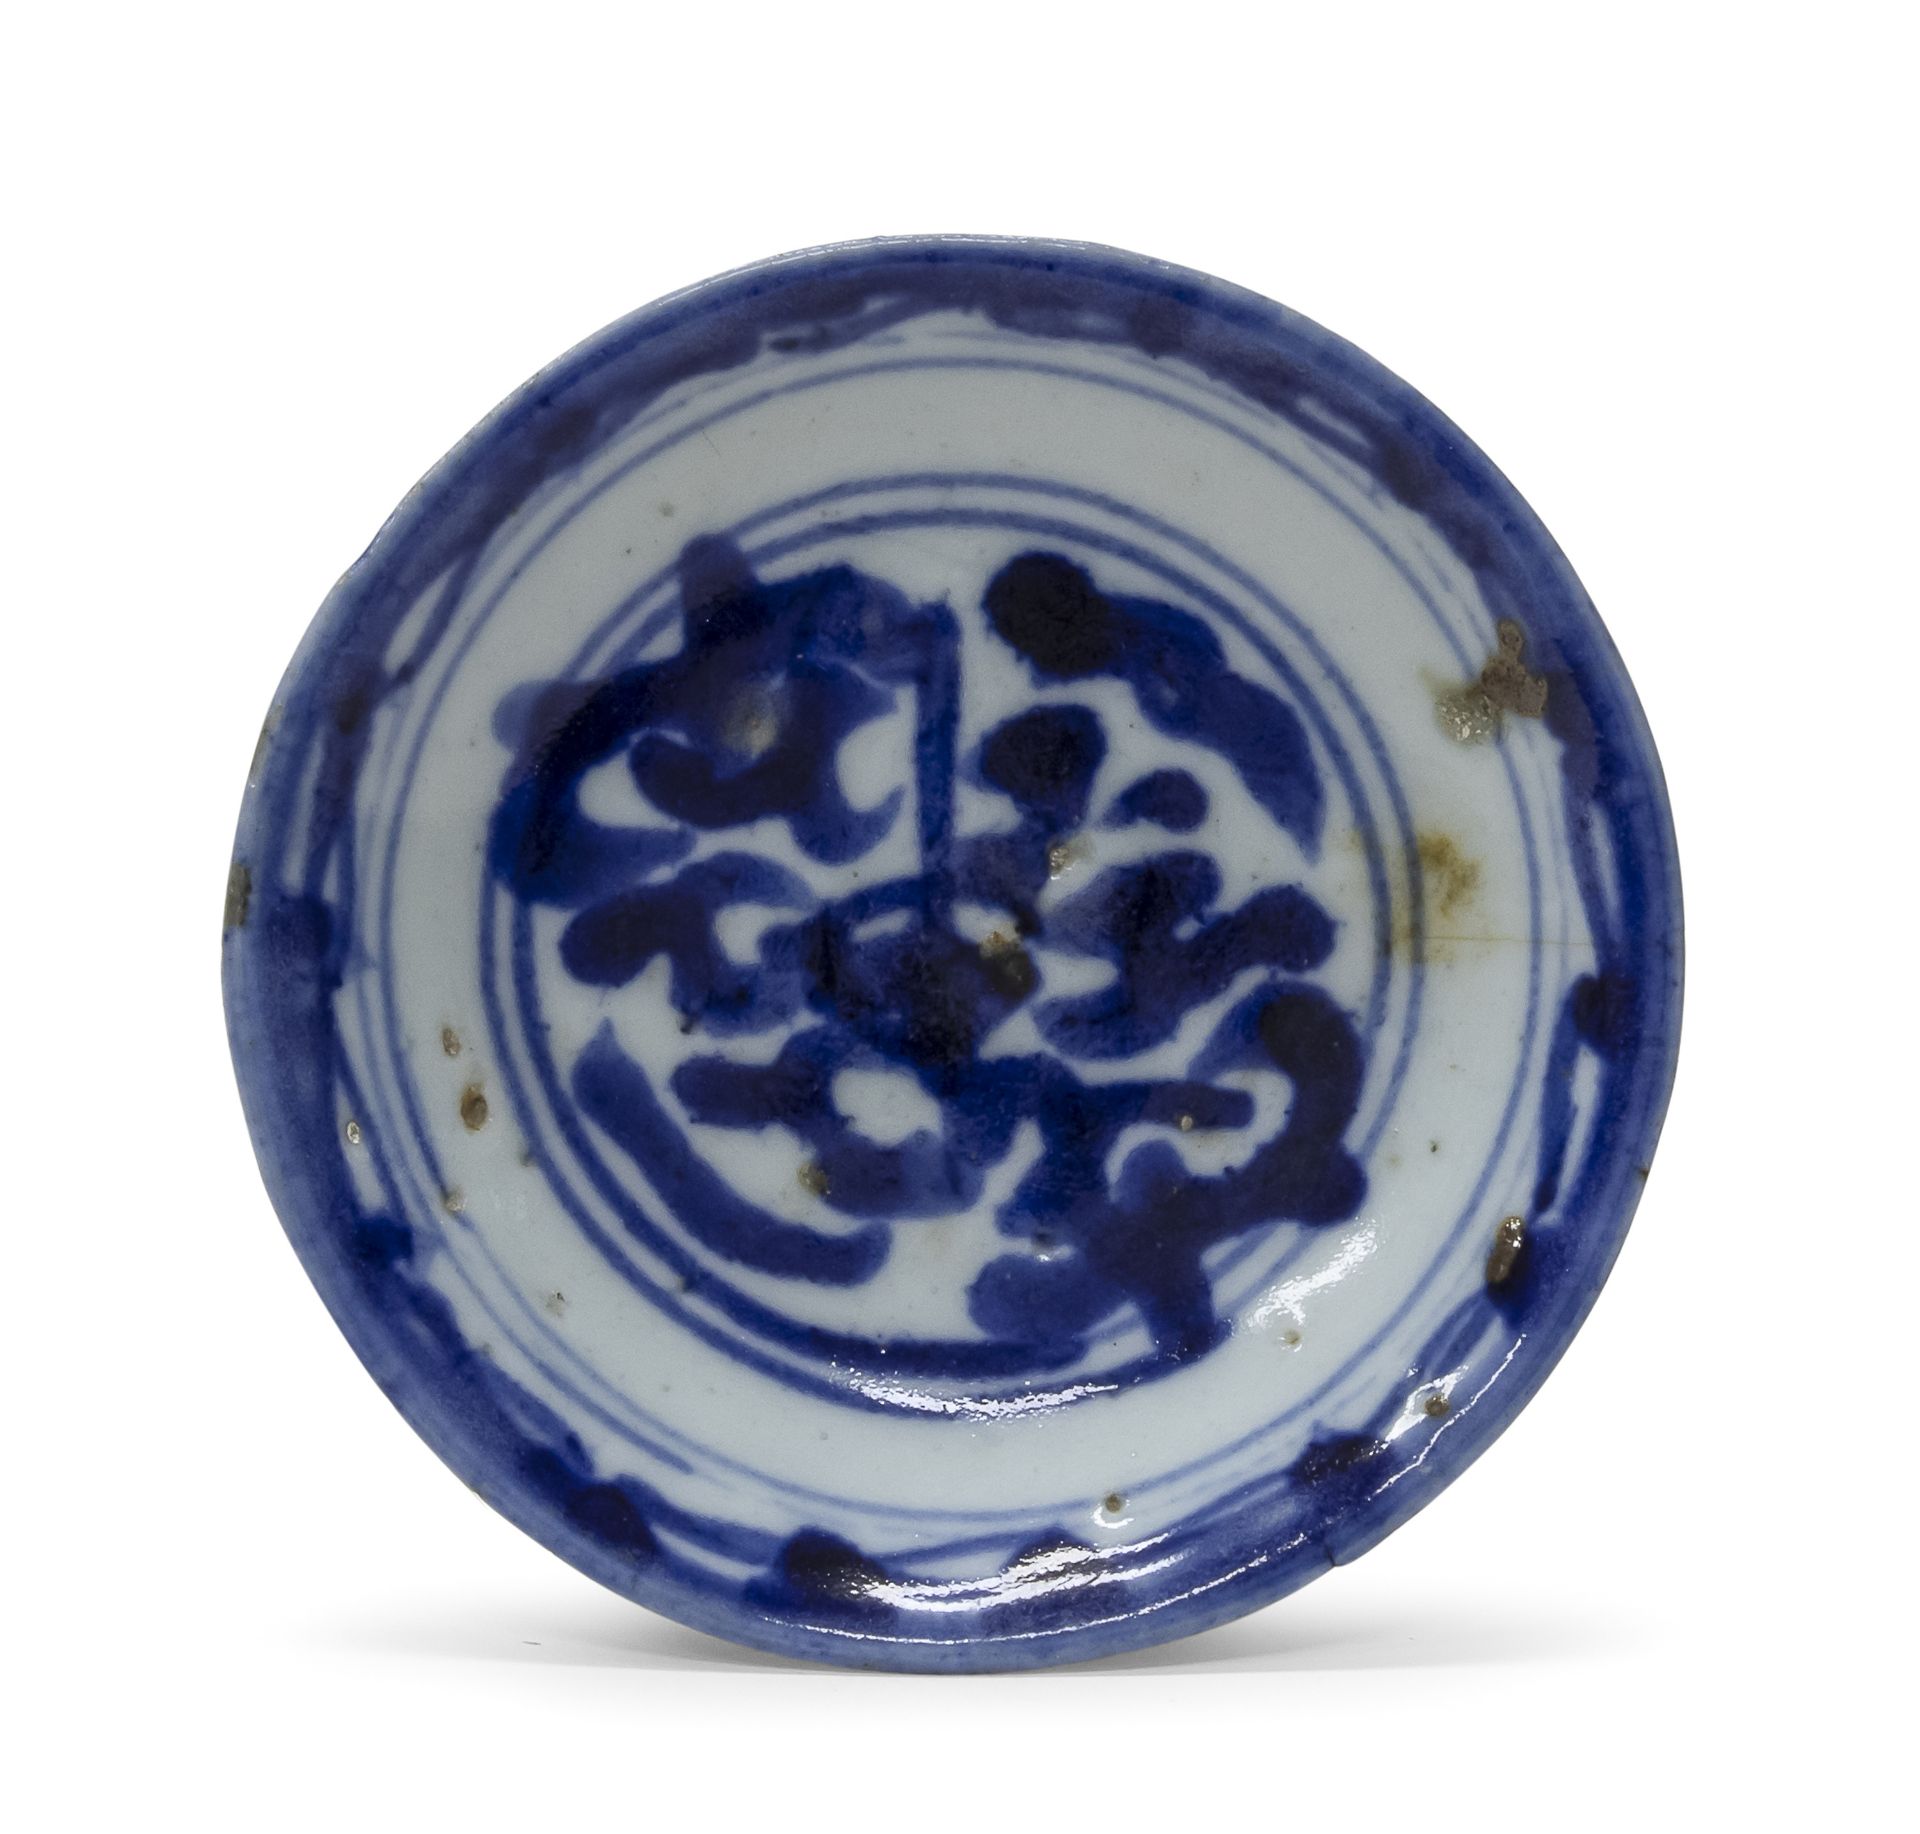 A SMALL JAPANESE WHITE AND BLUE PORCELAIN DISH. 18TH CENTURY.